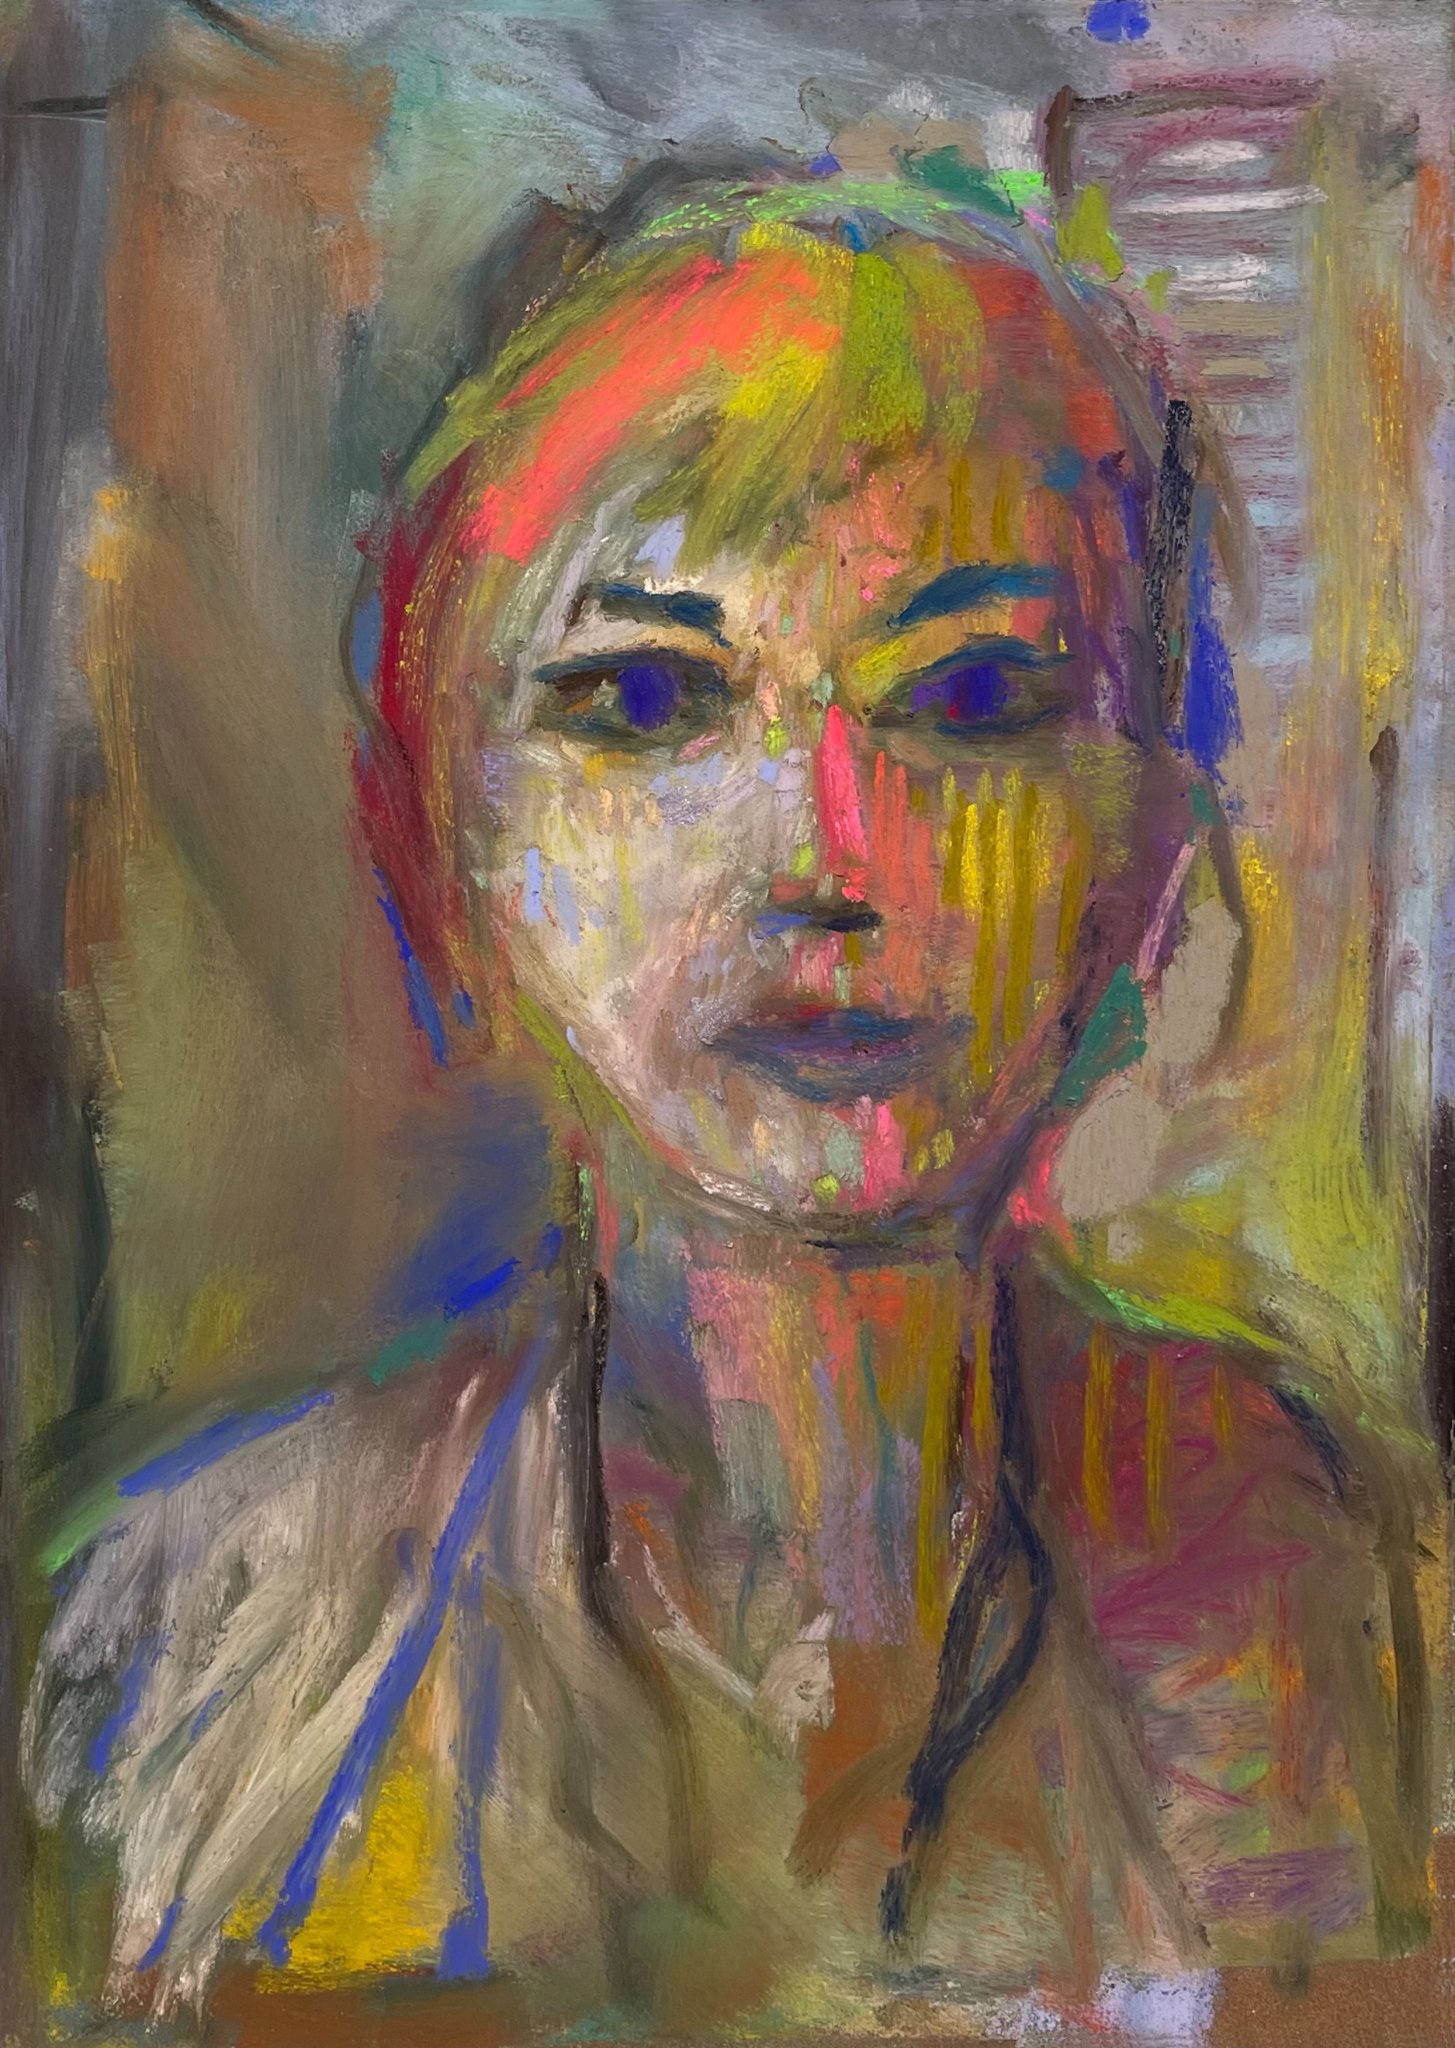 Influence of Matisse's "Woman With a Hat": Casey Klahn, "Mallory on Zoom," 2022, pastel on paper